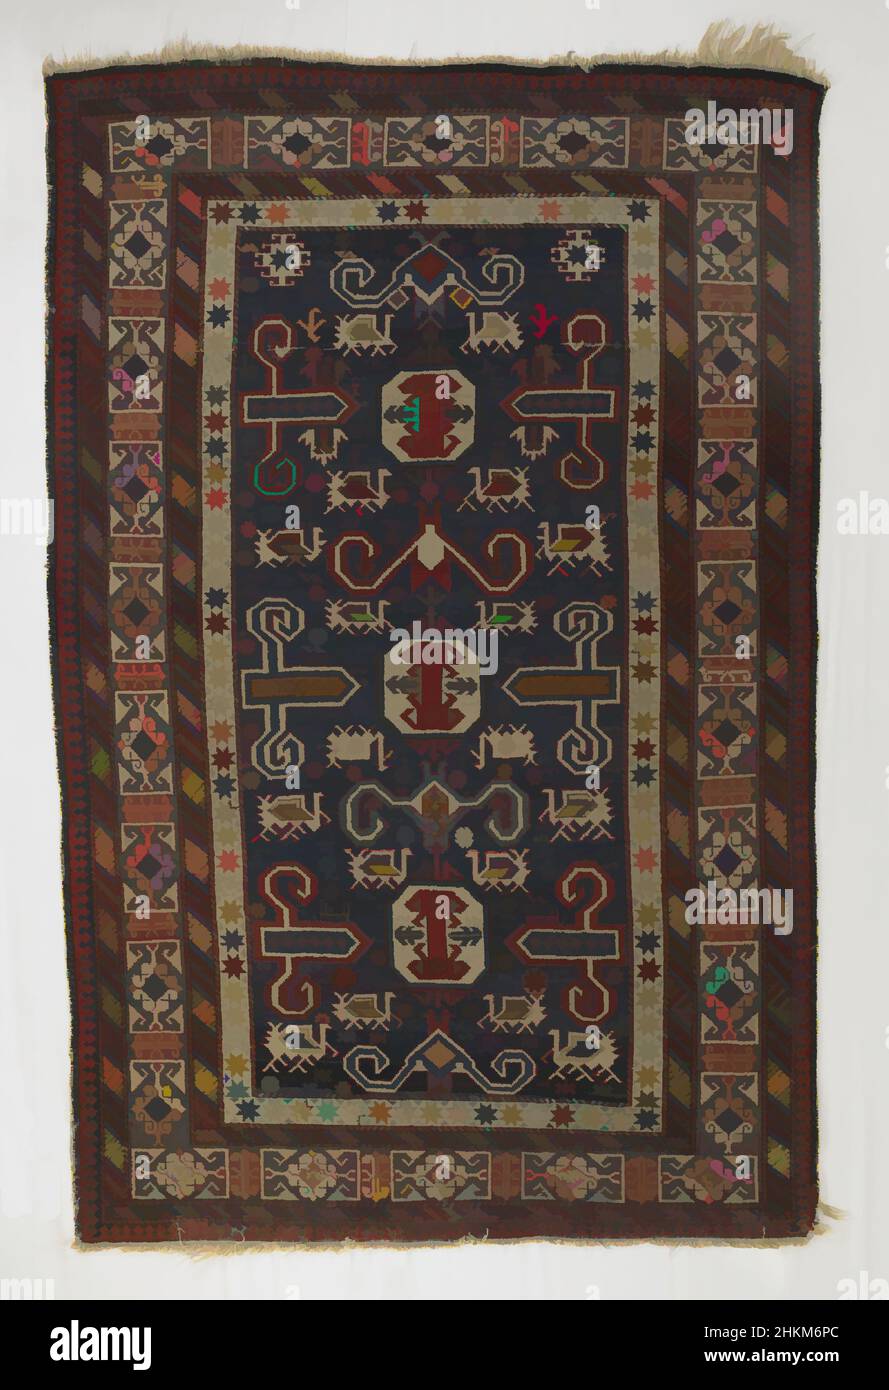 Art inspired by Small Shirvan Carpet with Kufesque Border and 'Perepedil' Pattern, Transcaucasian, late 19th century, Wool, Made in Caucasus, Azerbaijan, Asia, Coverings & hangings, textiles, 78 x 51 in. (198.1 x 129.5 cm, Classic works modernized by Artotop with a splash of modernity. Shapes, color and value, eye-catching visual impact on art. Emotions through freedom of artworks in a contemporary way. A timeless message pursuing a wildly creative new direction. Artists turning to the digital medium and creating the Artotop NFT Stock Photo